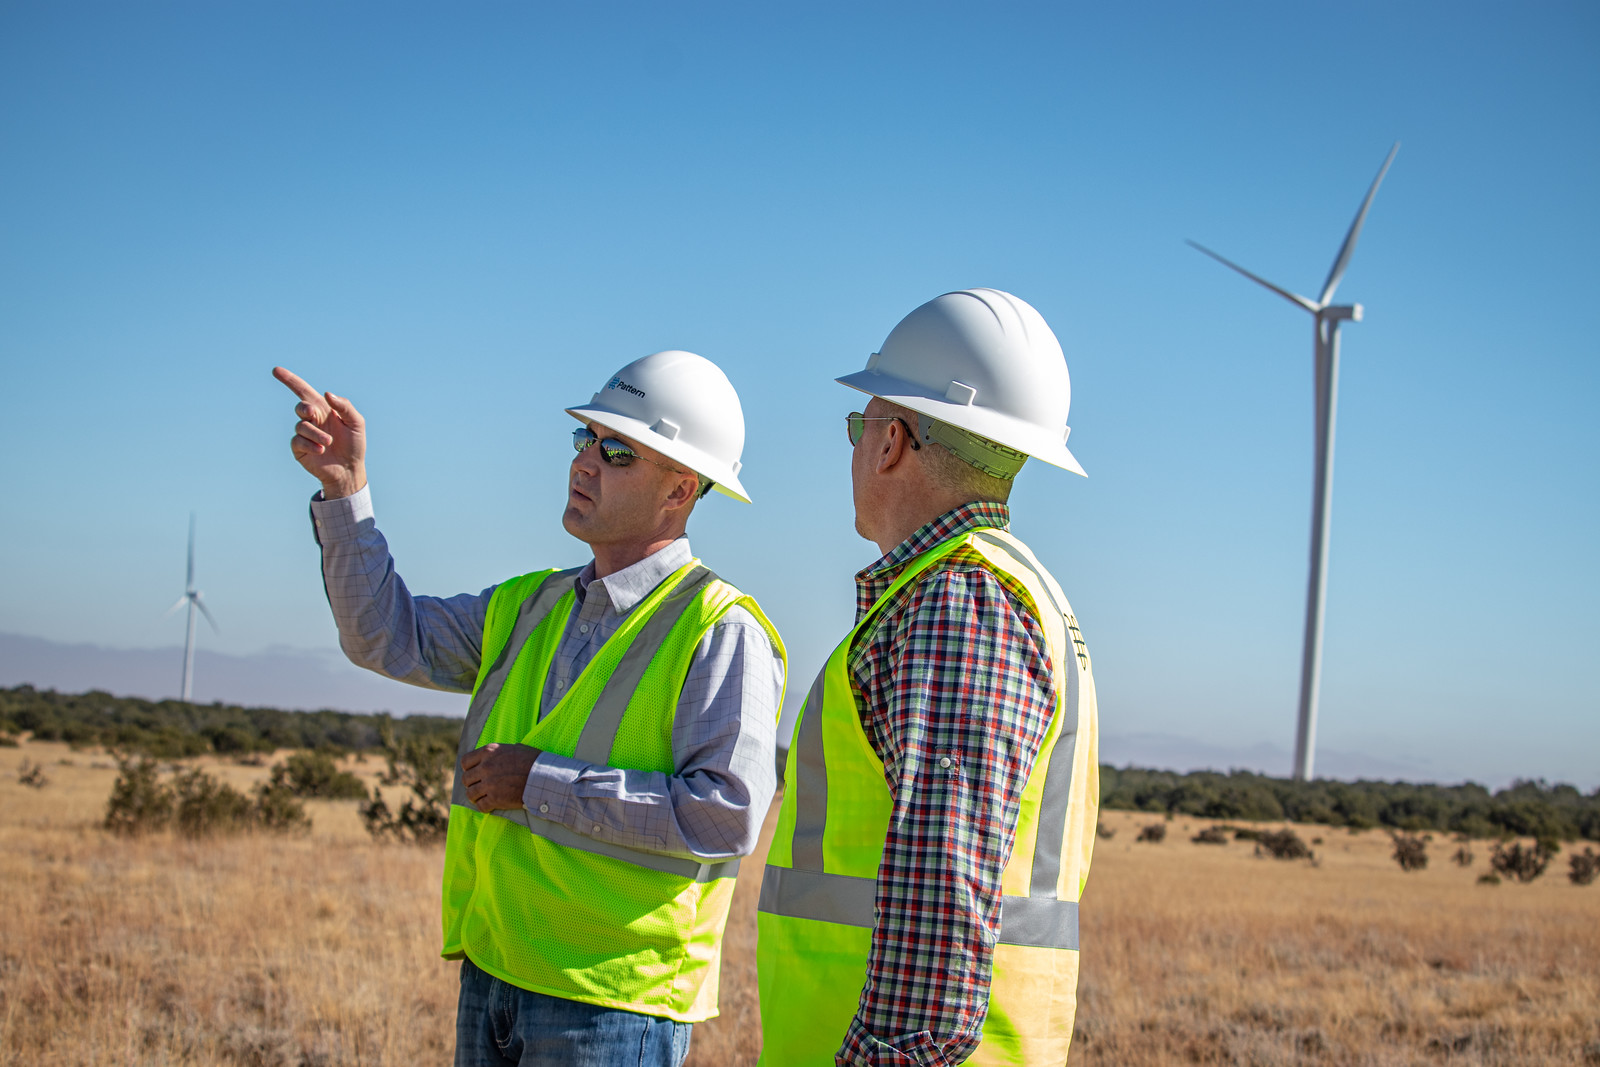 men visiting during wind turbine field day